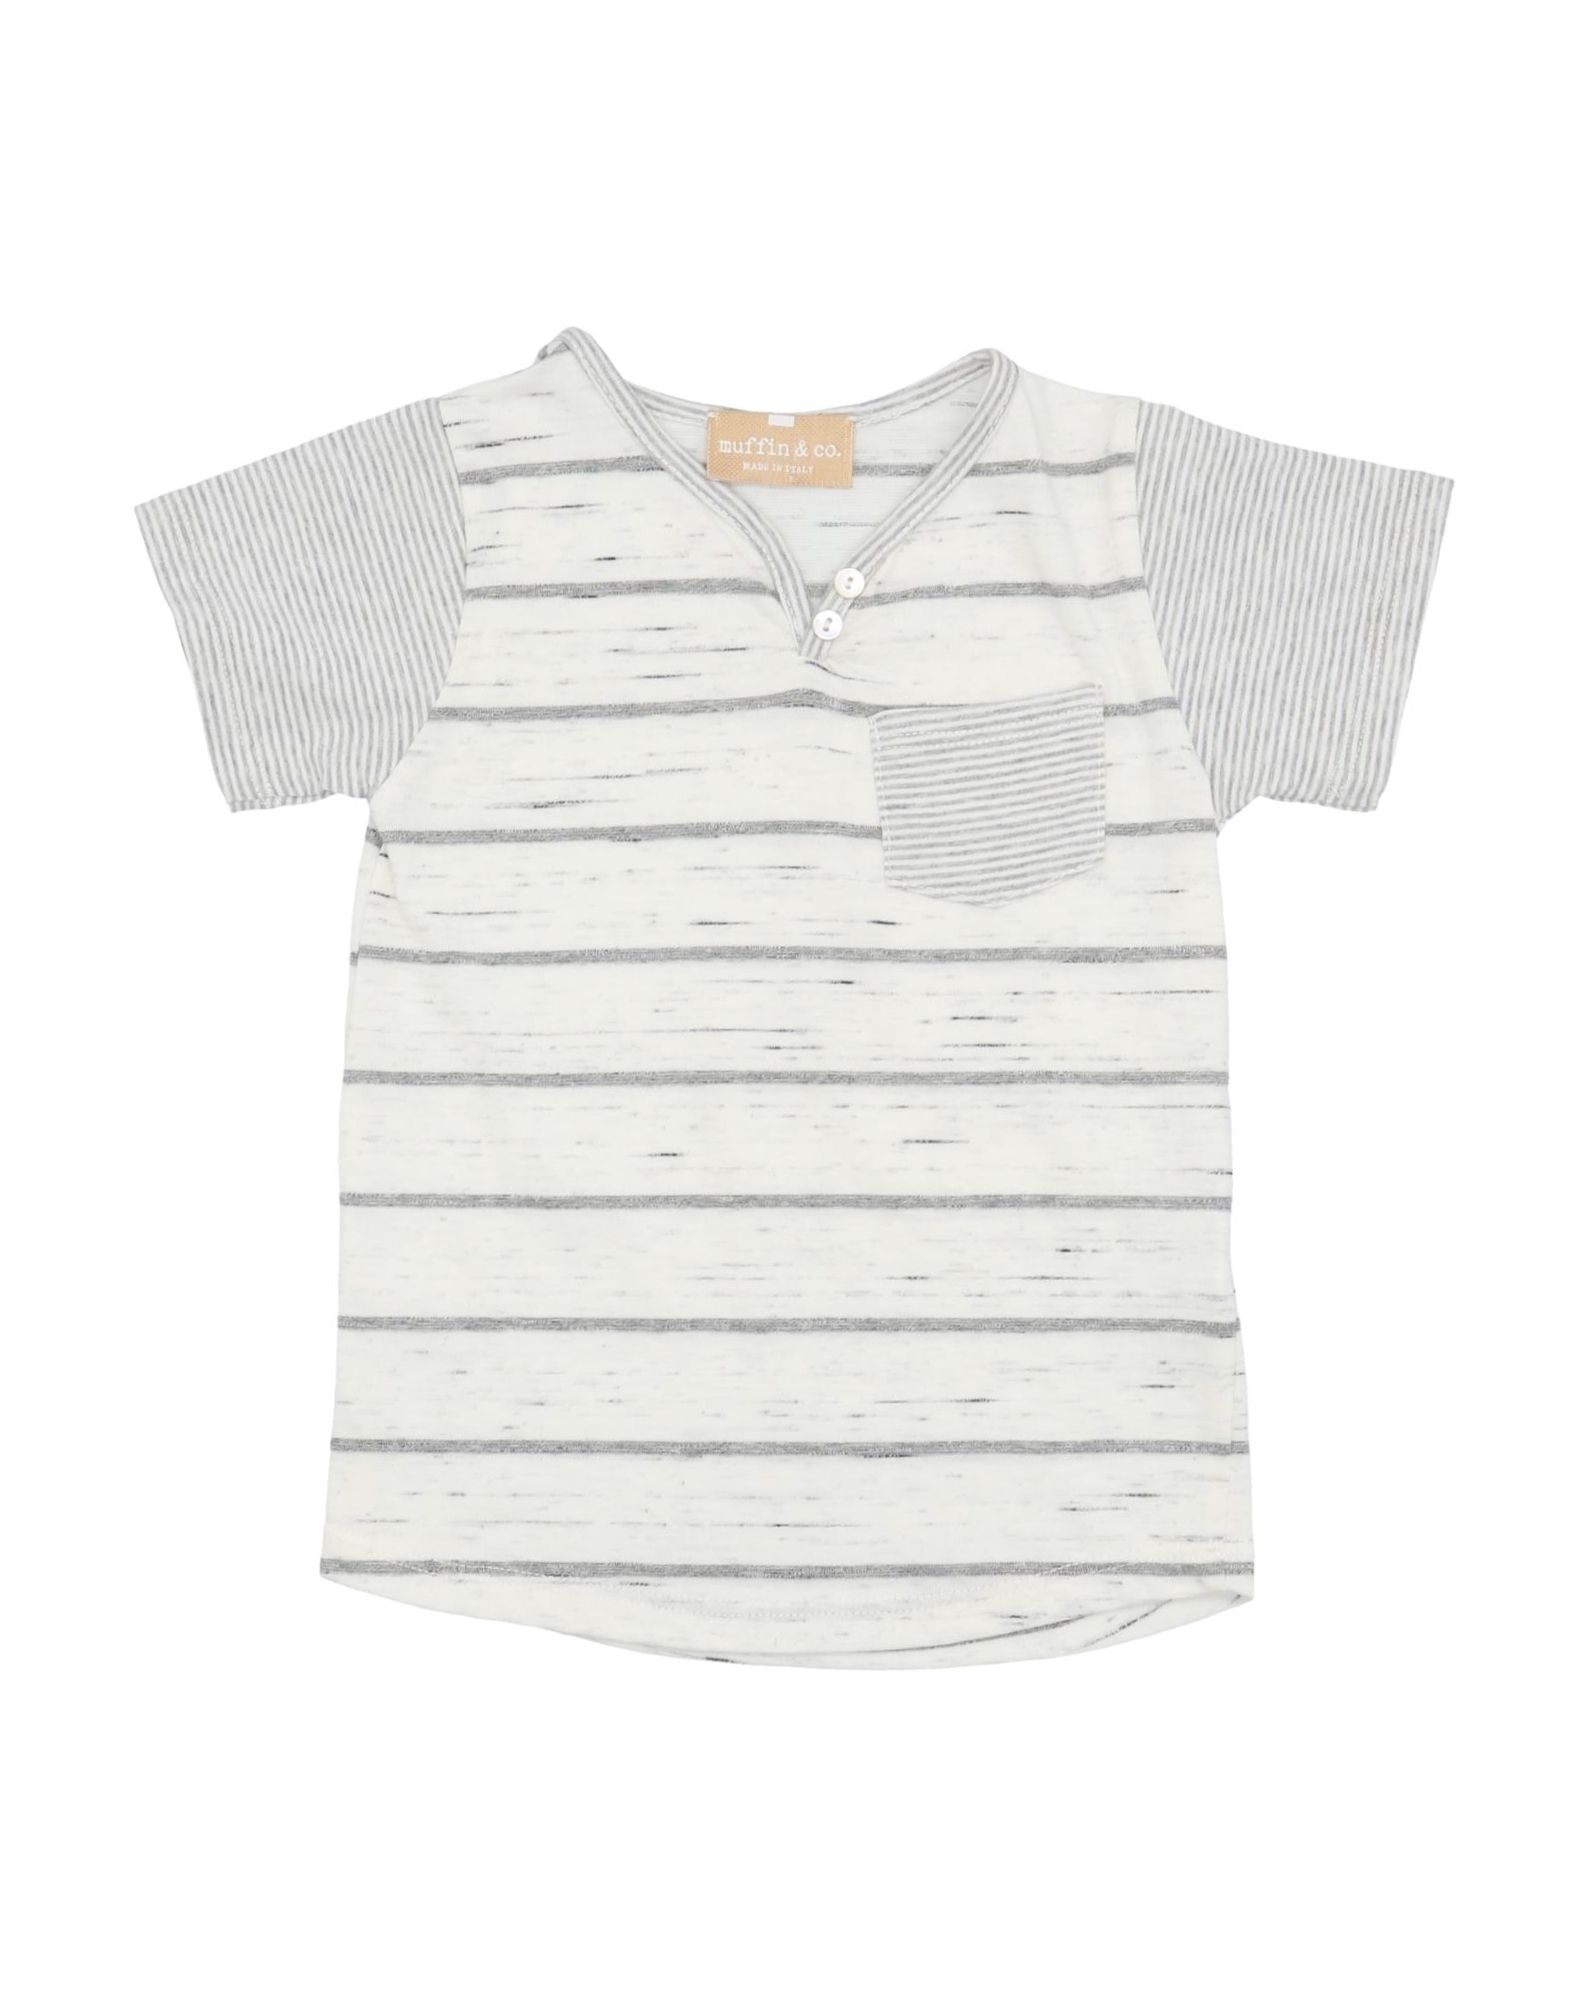 Muffin & Co. Kids' T-shirts In Ivory